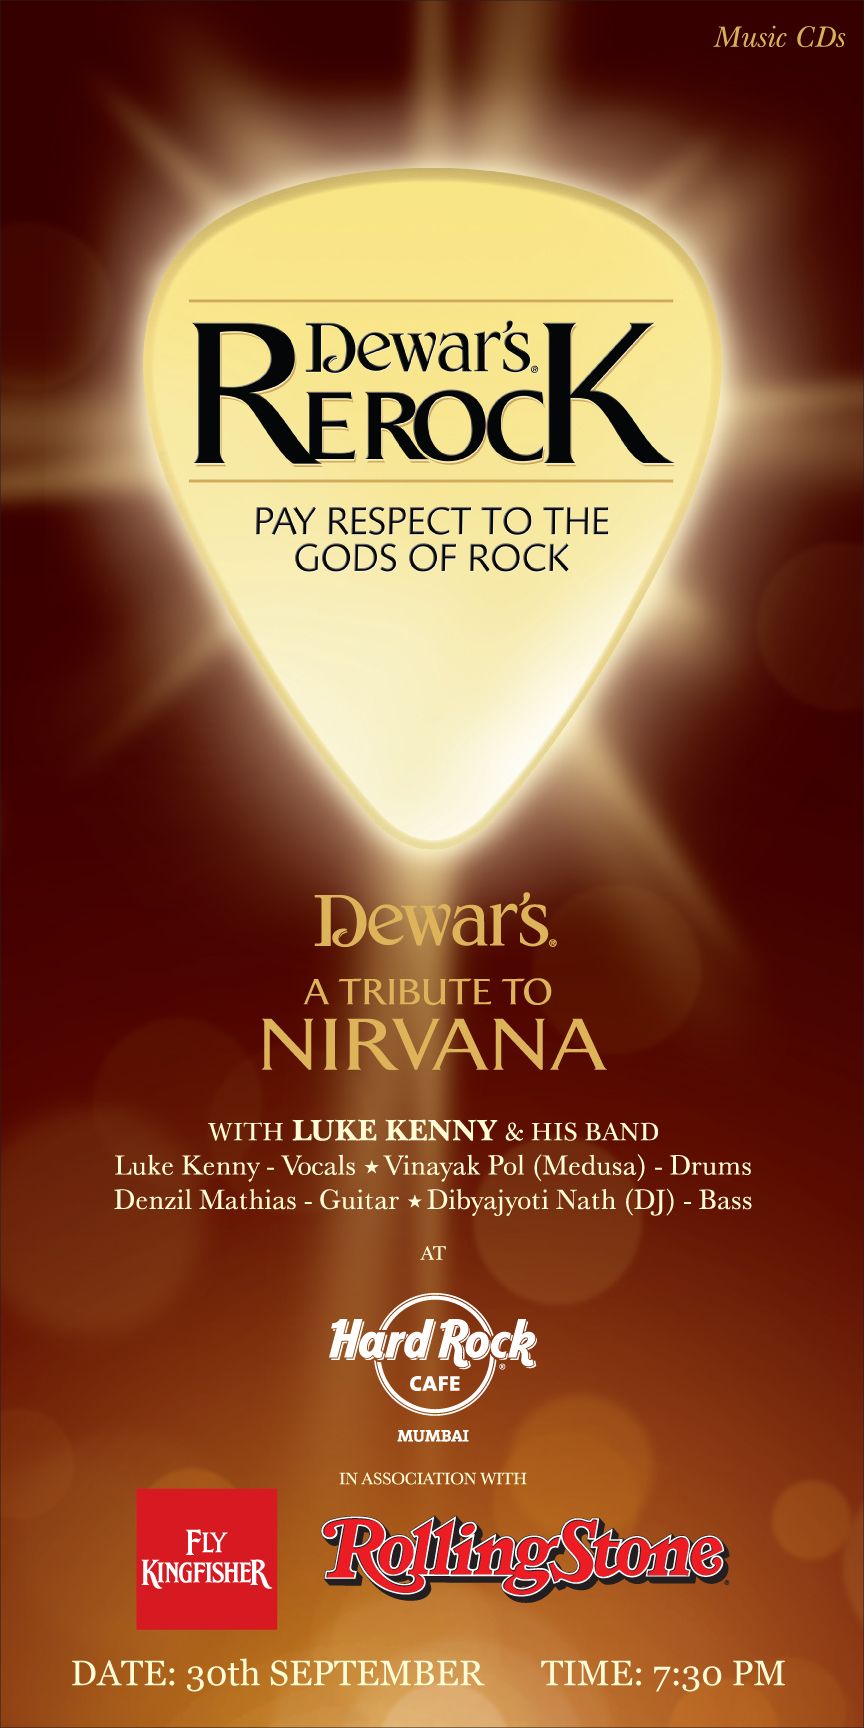 Come As You Are for the Legends of Rock Tribute to Nirvana!